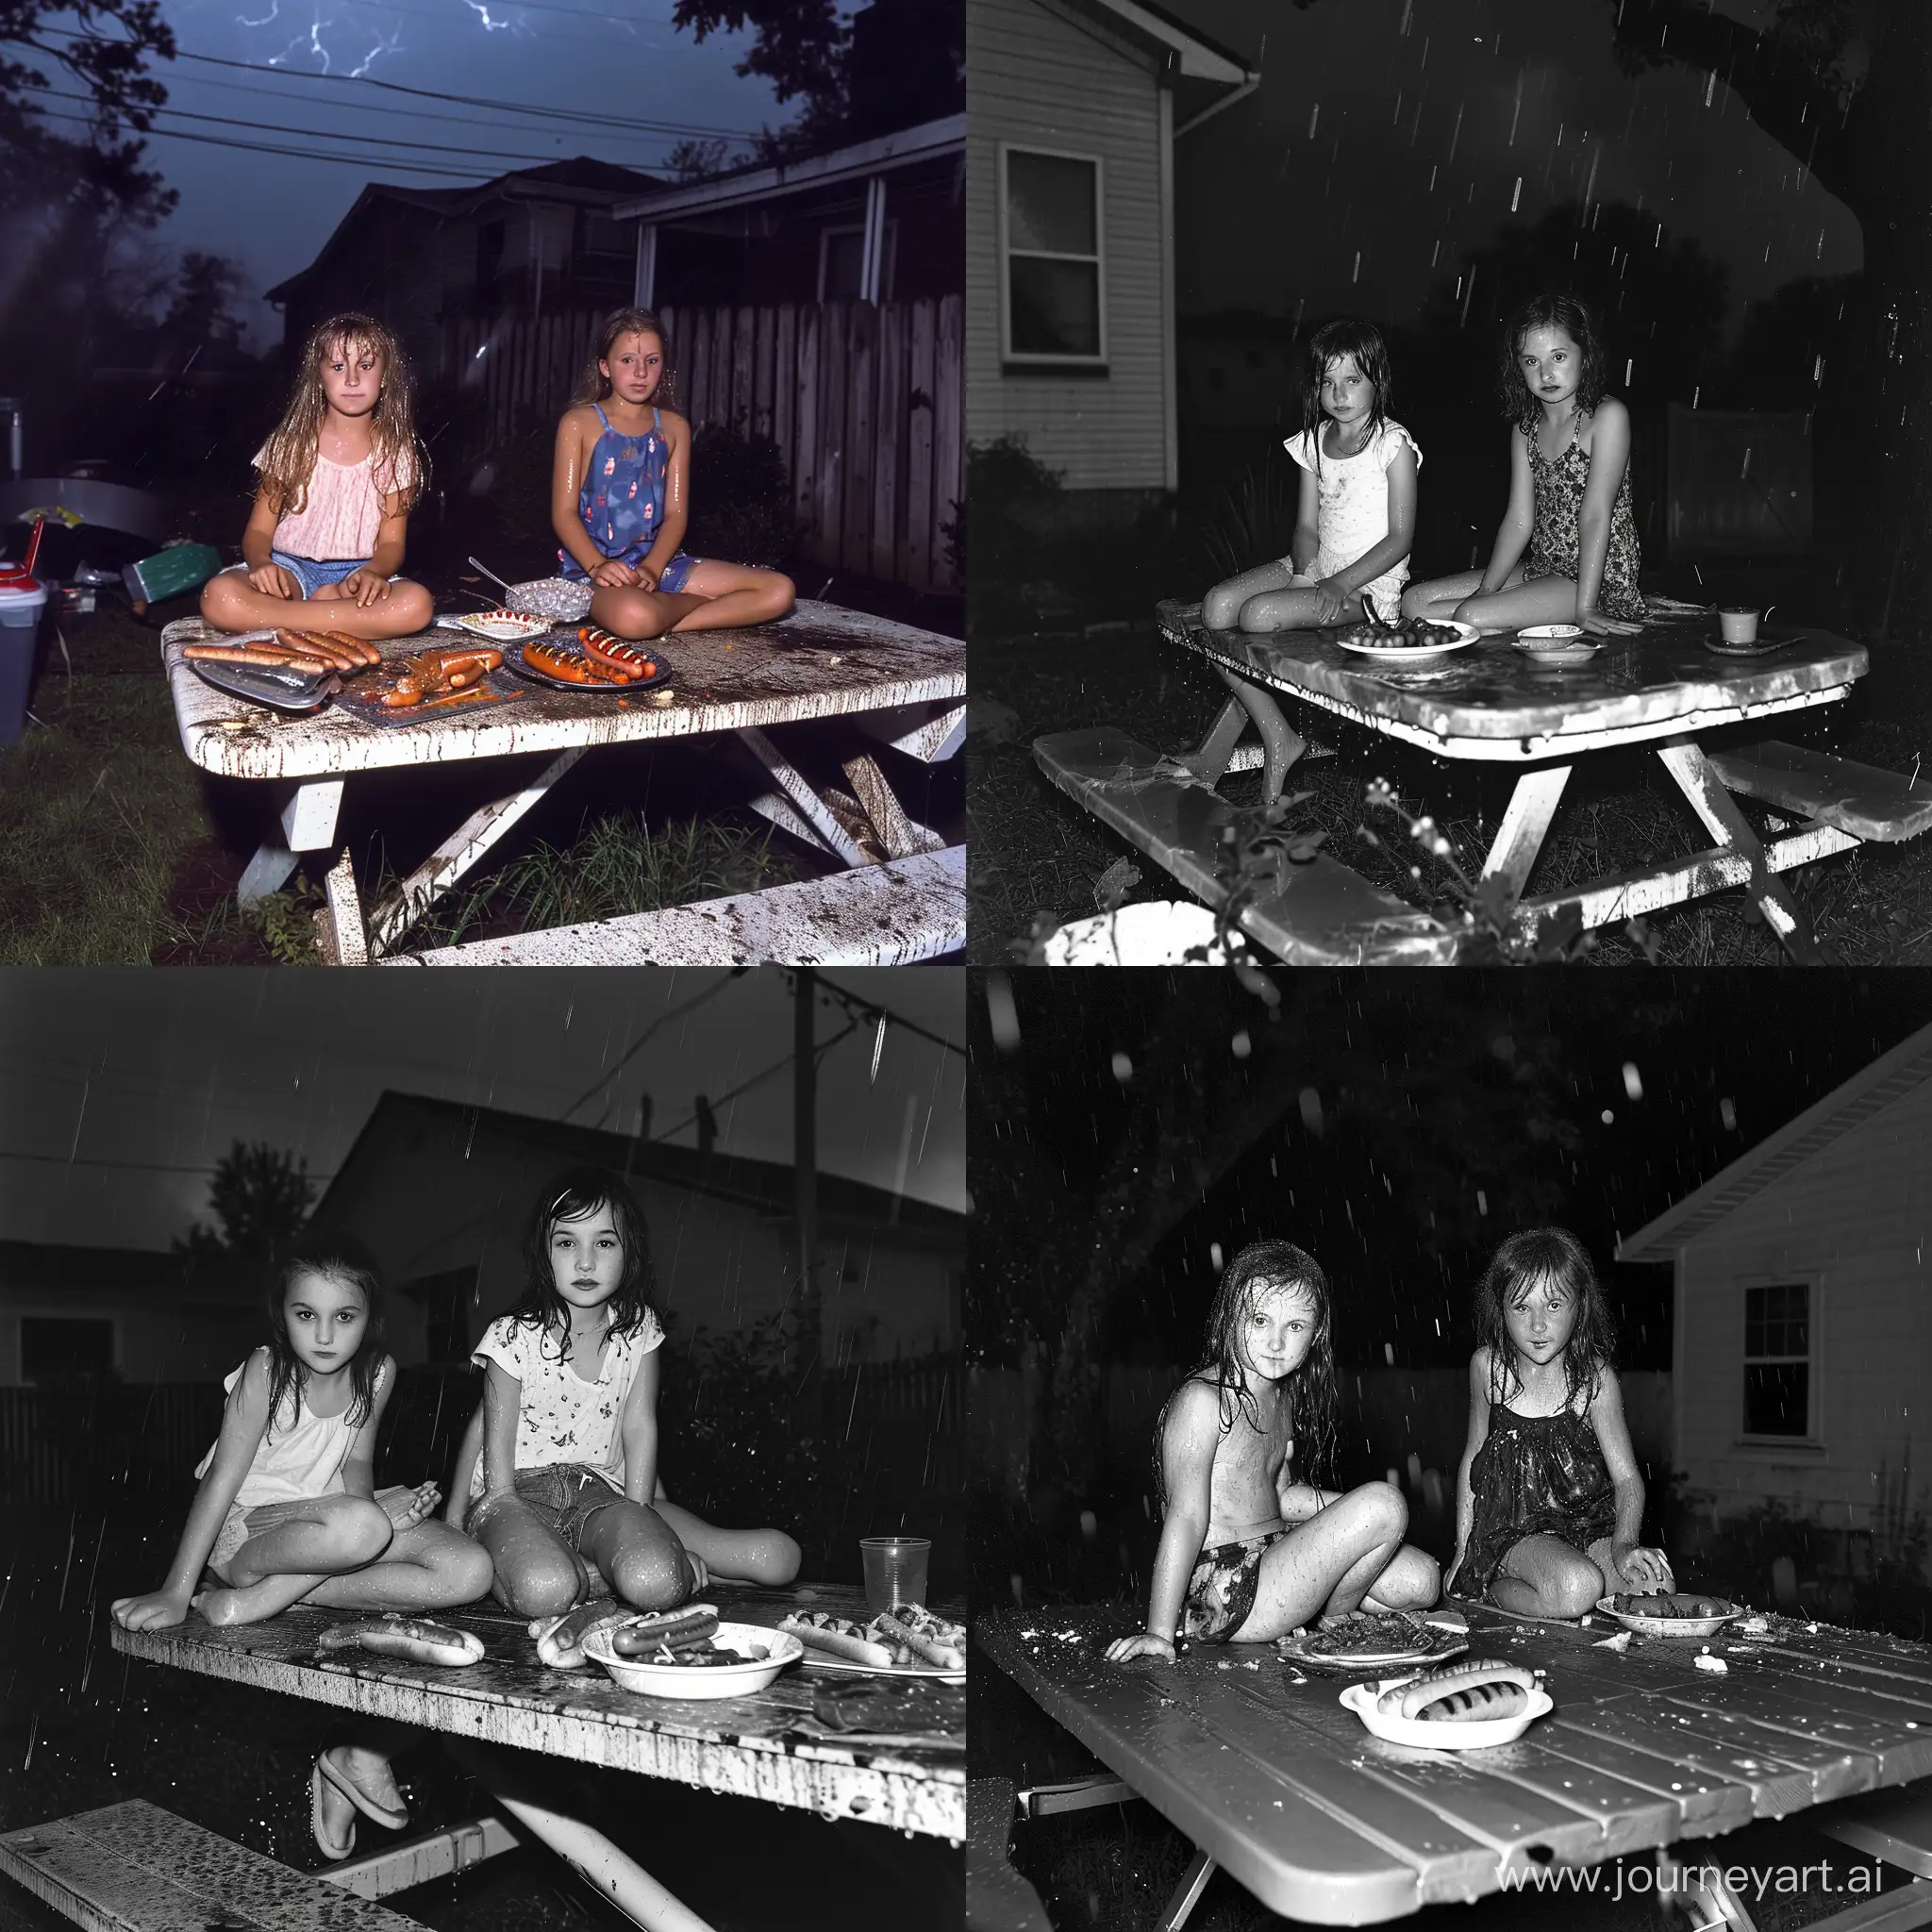 Kodachrome photograph, film grain, 35mm, natural lighting, nighttime thunderstorm, two american girls sitting atopa cluttered picnic table in the back yard, raindrenched, a plate of hotdogs on the table